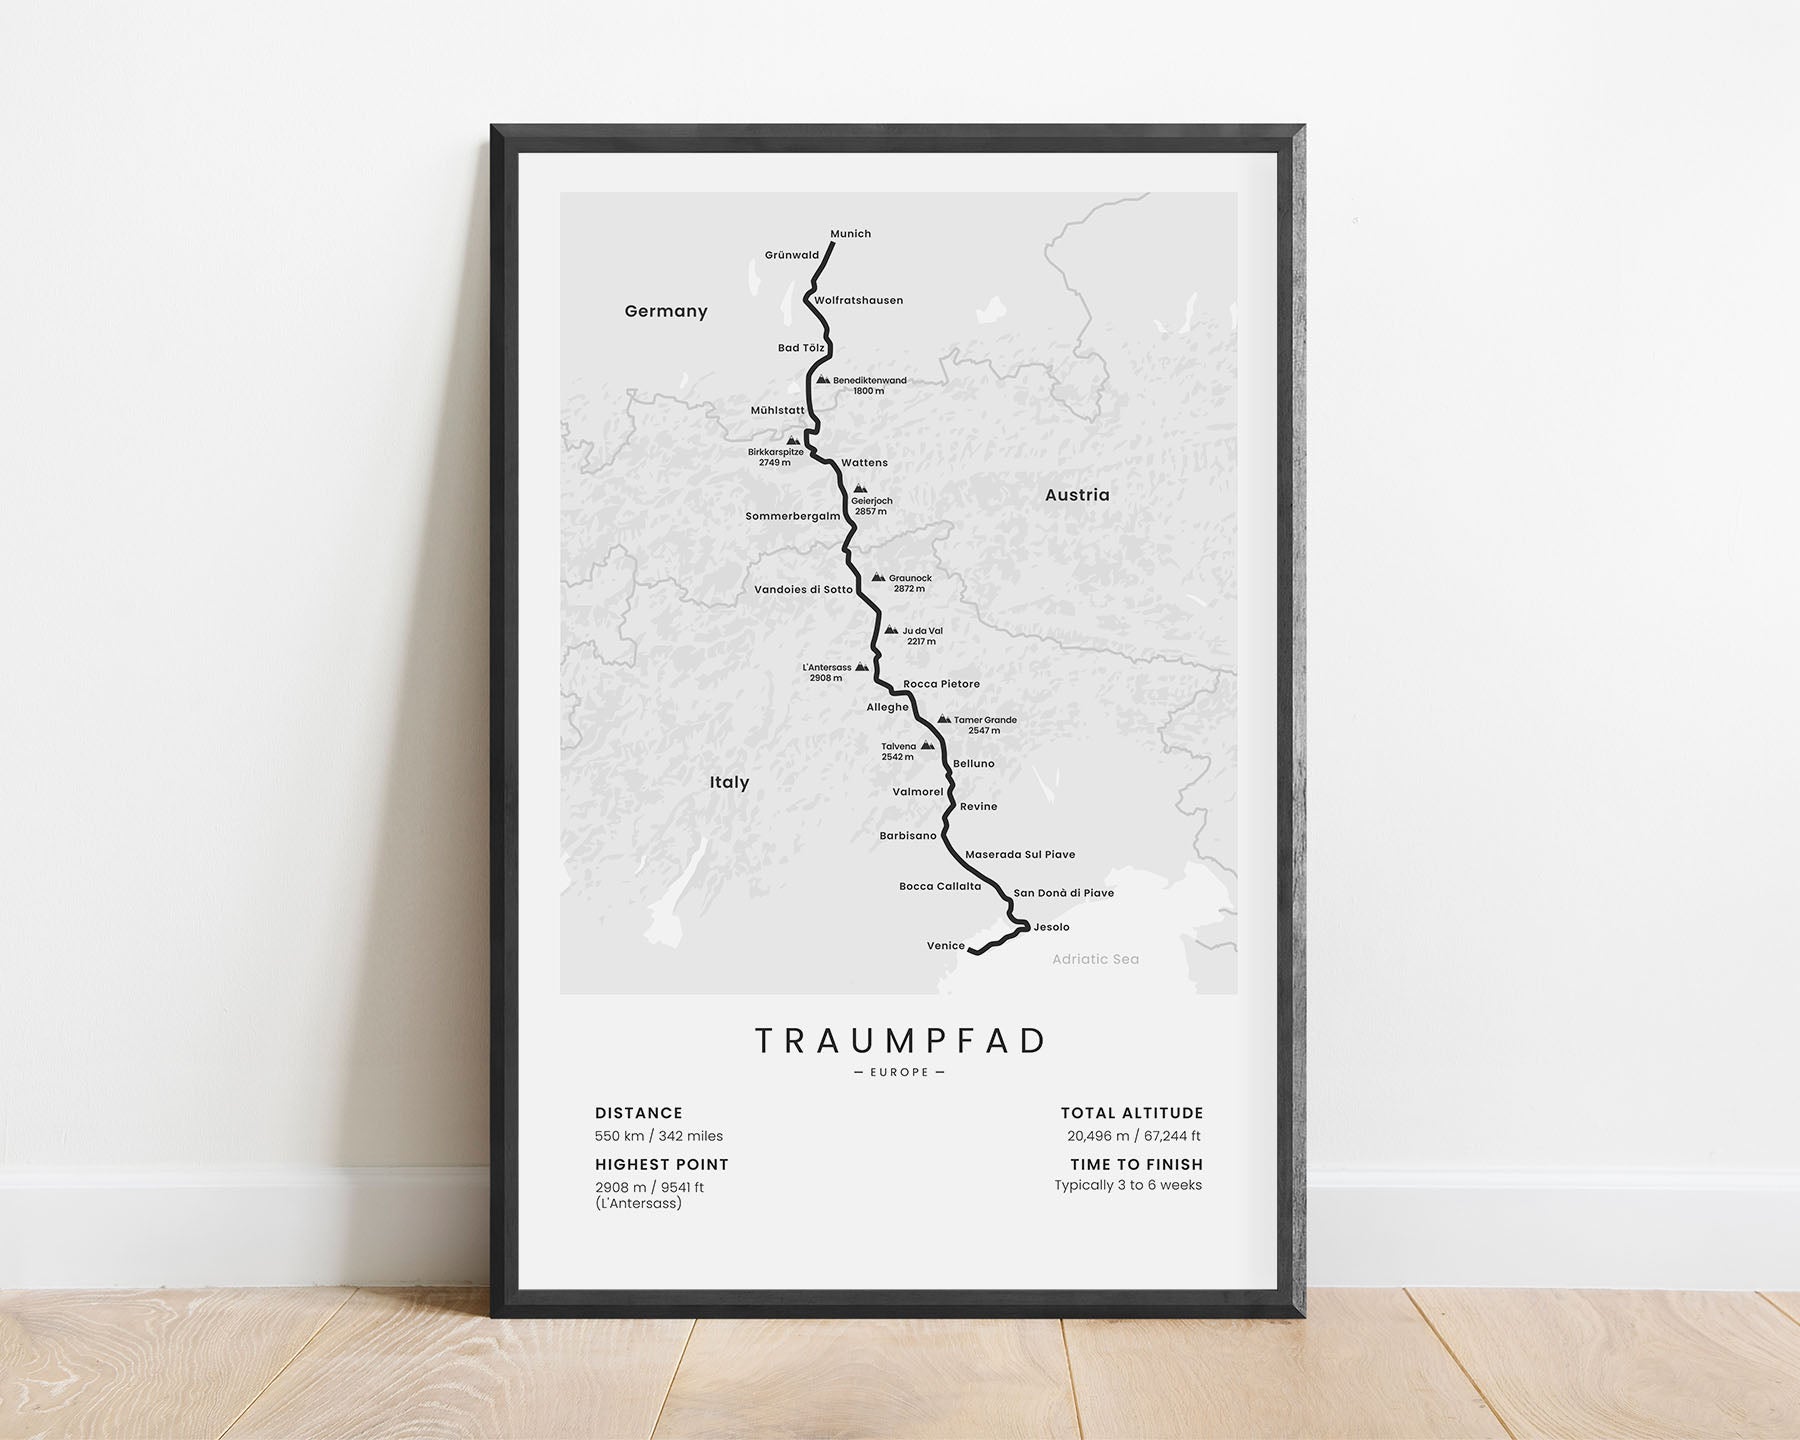 Traumpfad (Alps) hike poster with white background